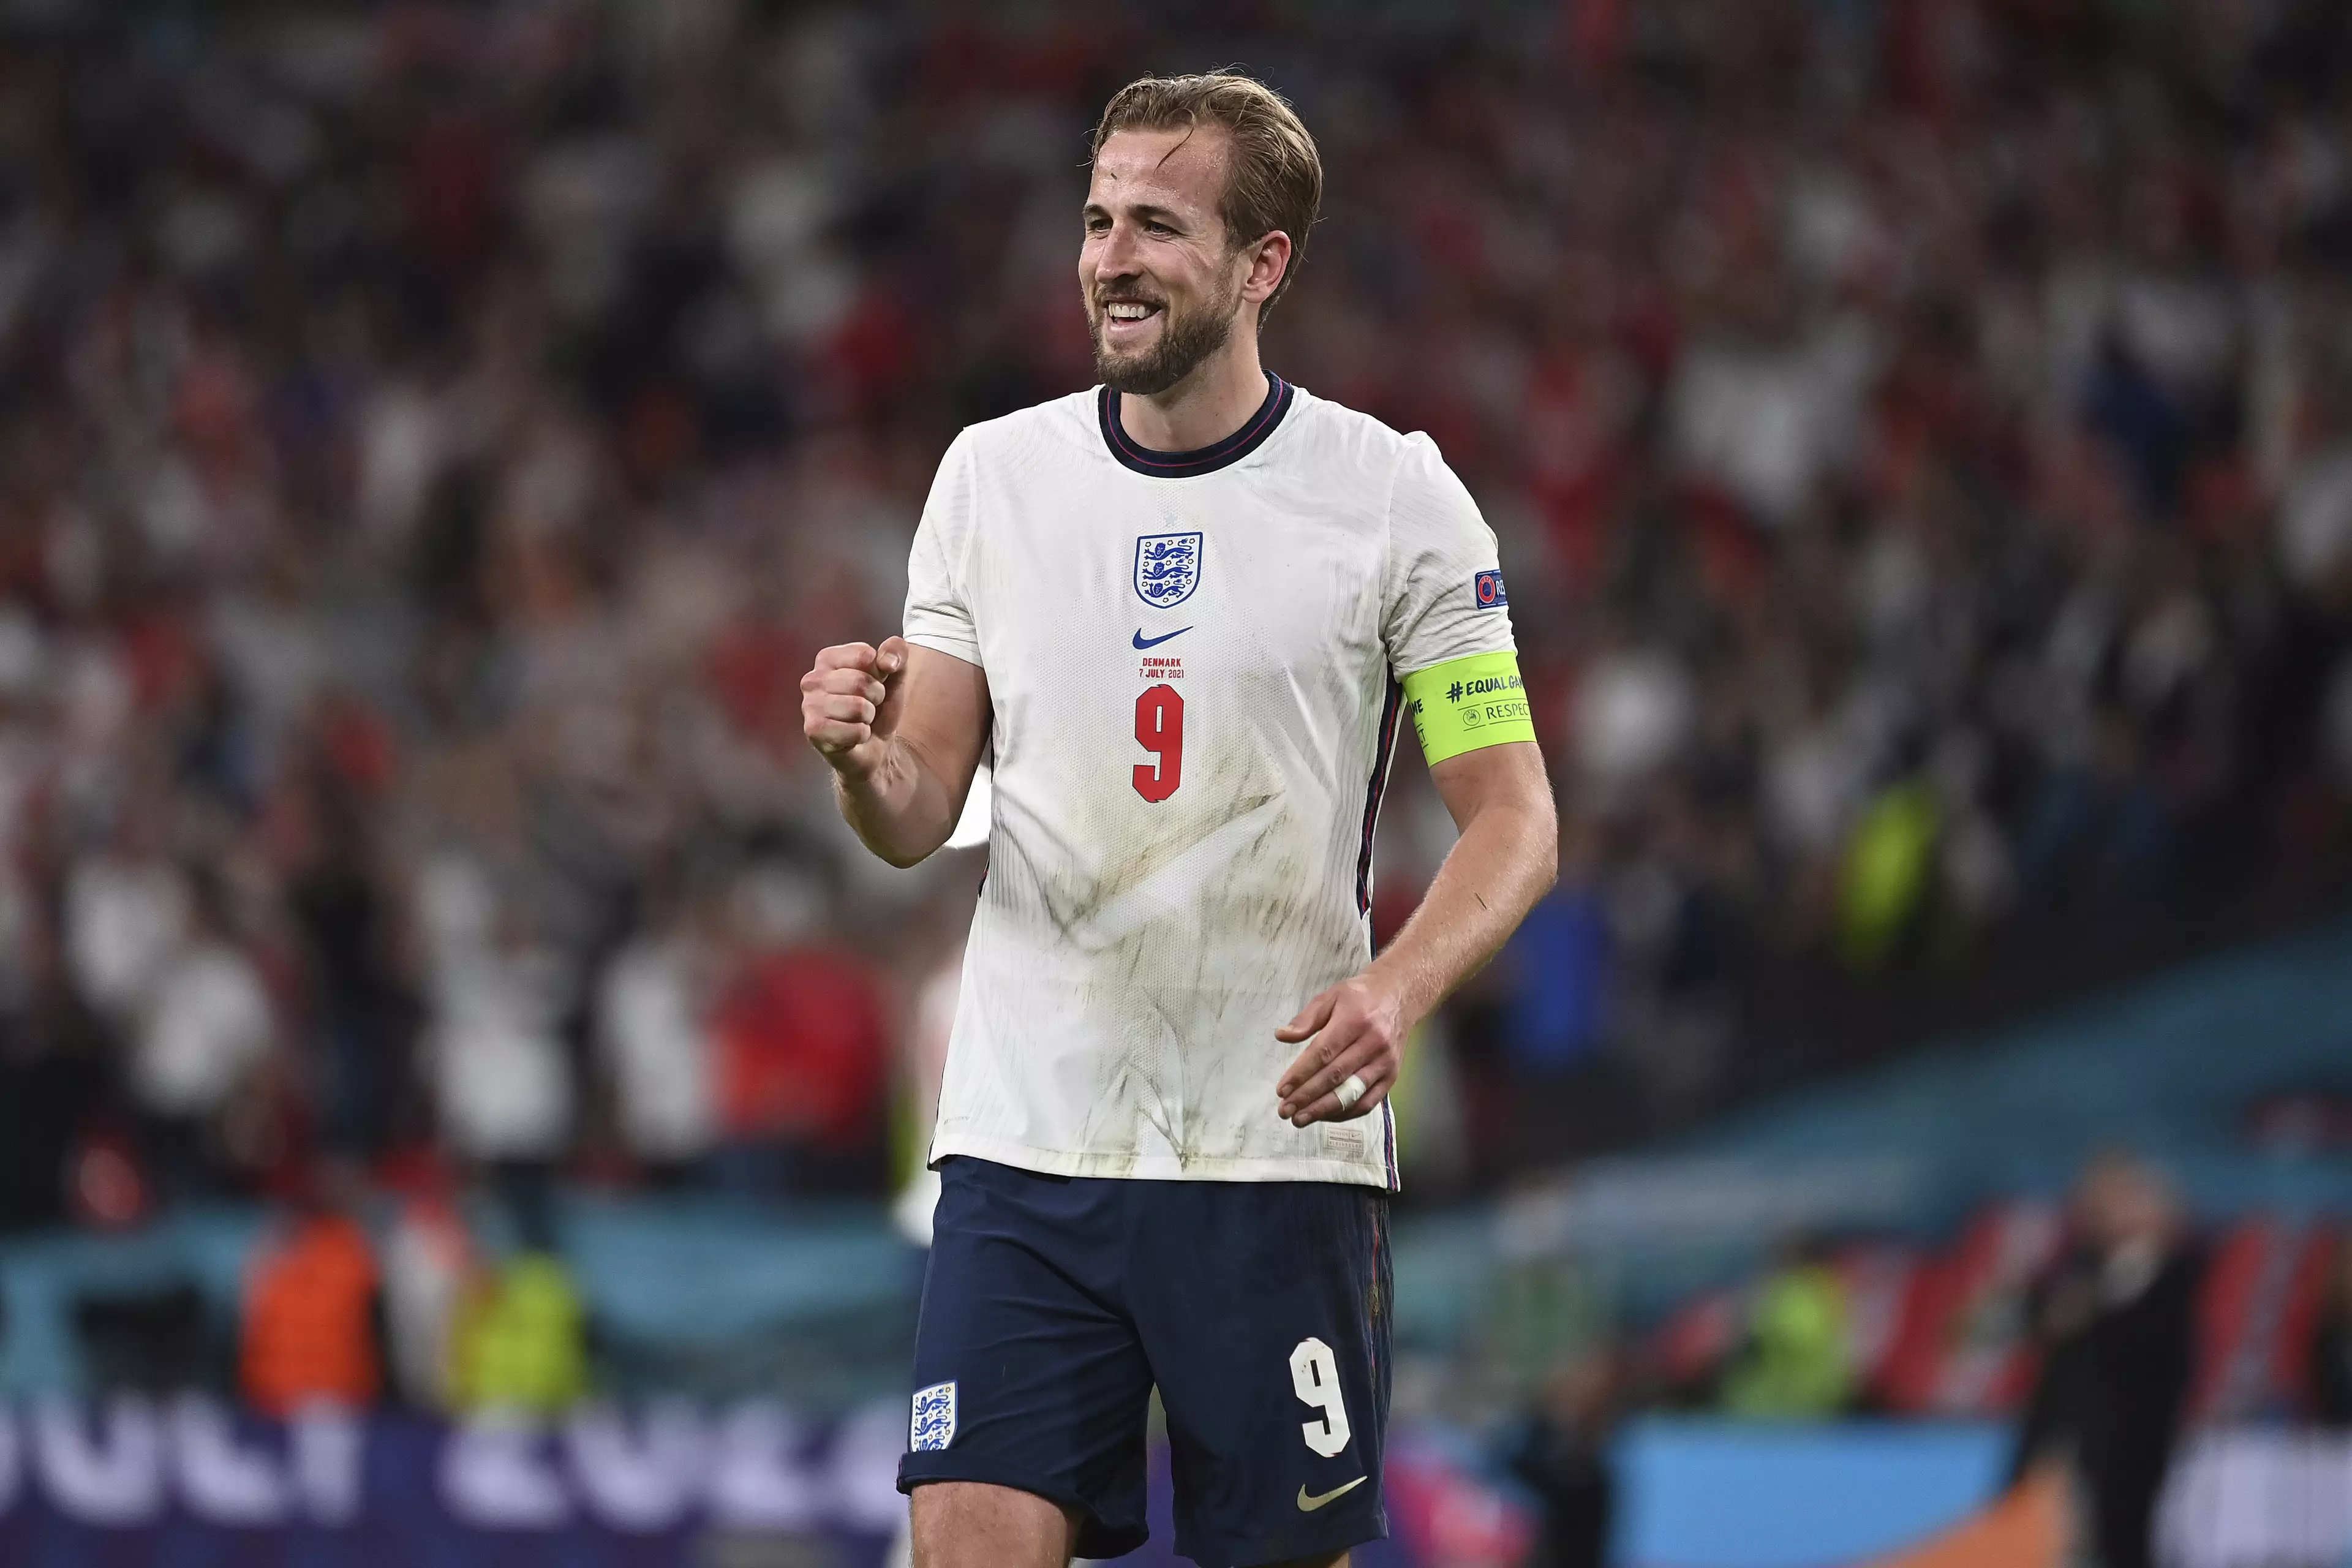 He will now get to see Harry Kane and the boys take on Italy at Wembley in this weekend's final.